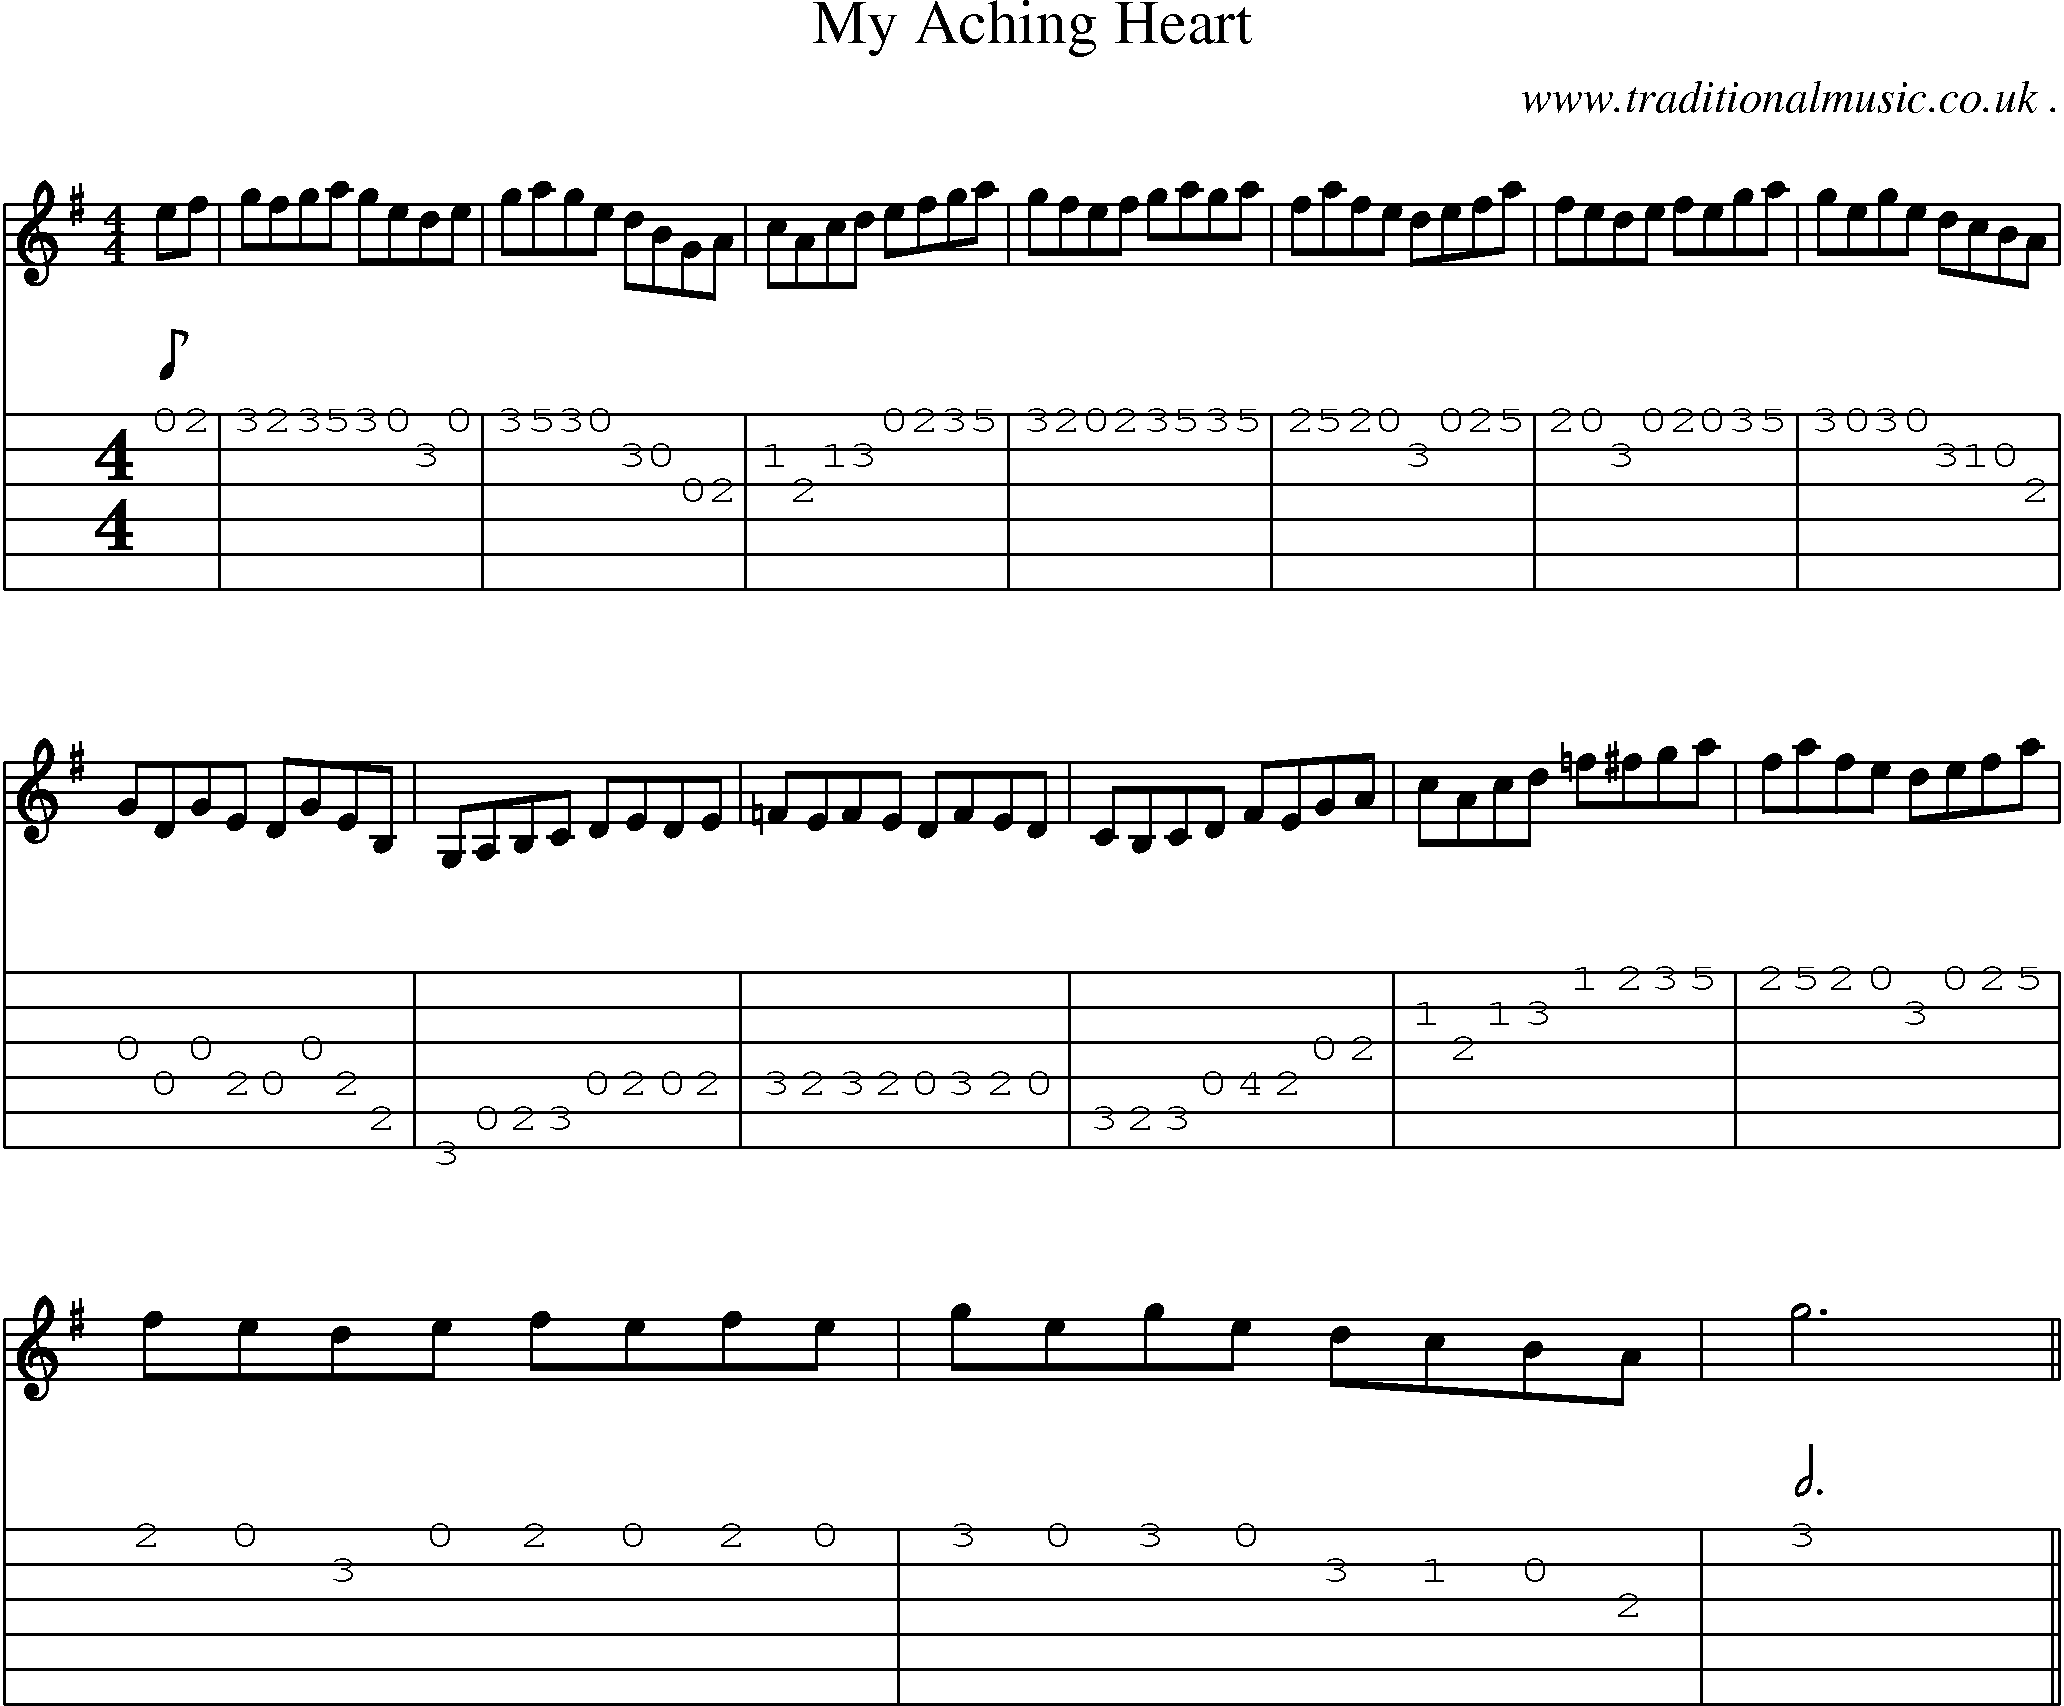 Music Score and Guitar Tabs for My Aching Heart